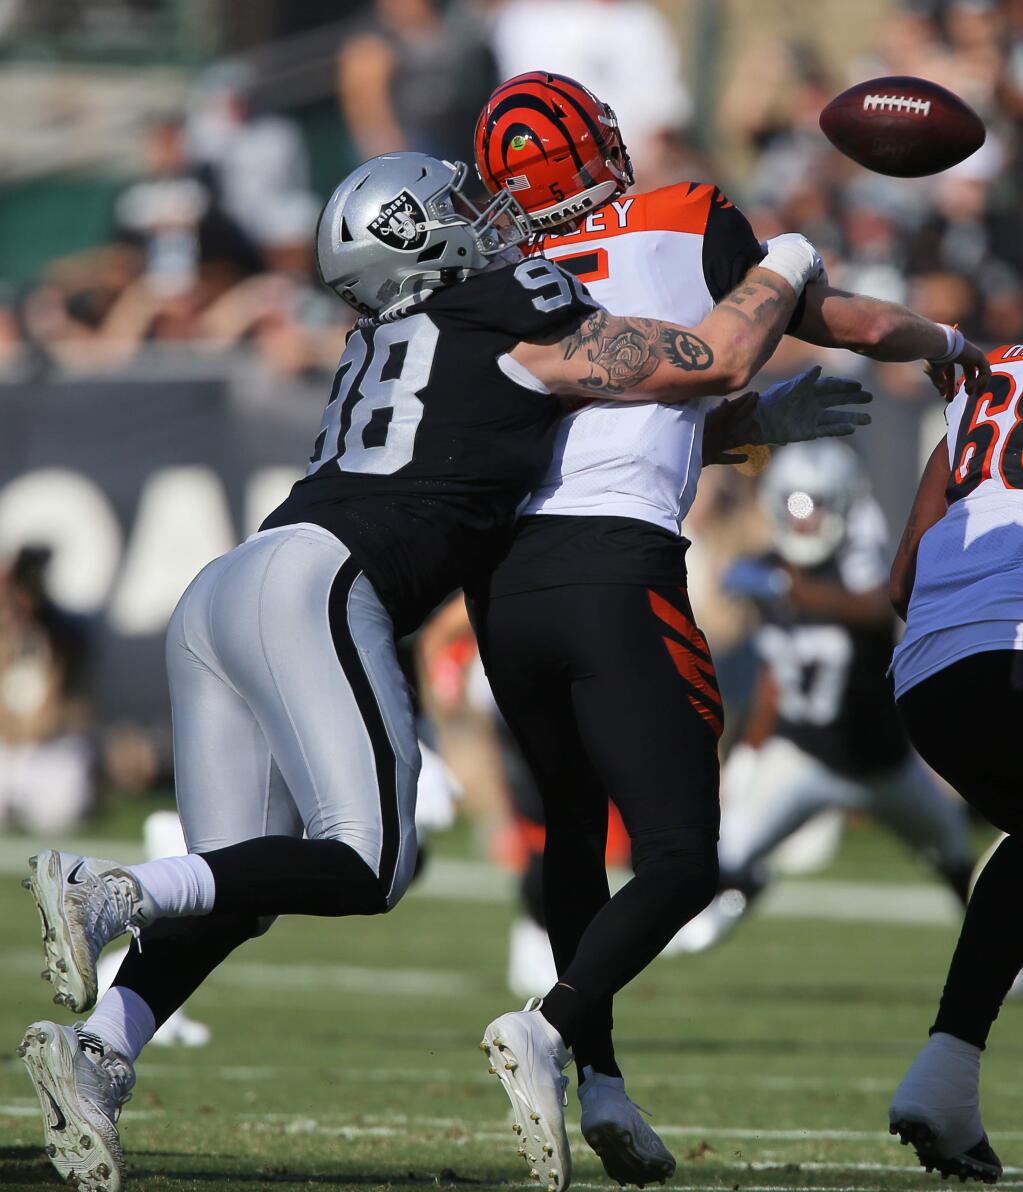 Oakland Raiders defensive end Maxx Crosby strips the ball from Cincinnati Bengals quarterback Ryan Finley during their game in Oakland on Sunday, November 17, 2019. (Christopher Chung/ The Press Democrat)